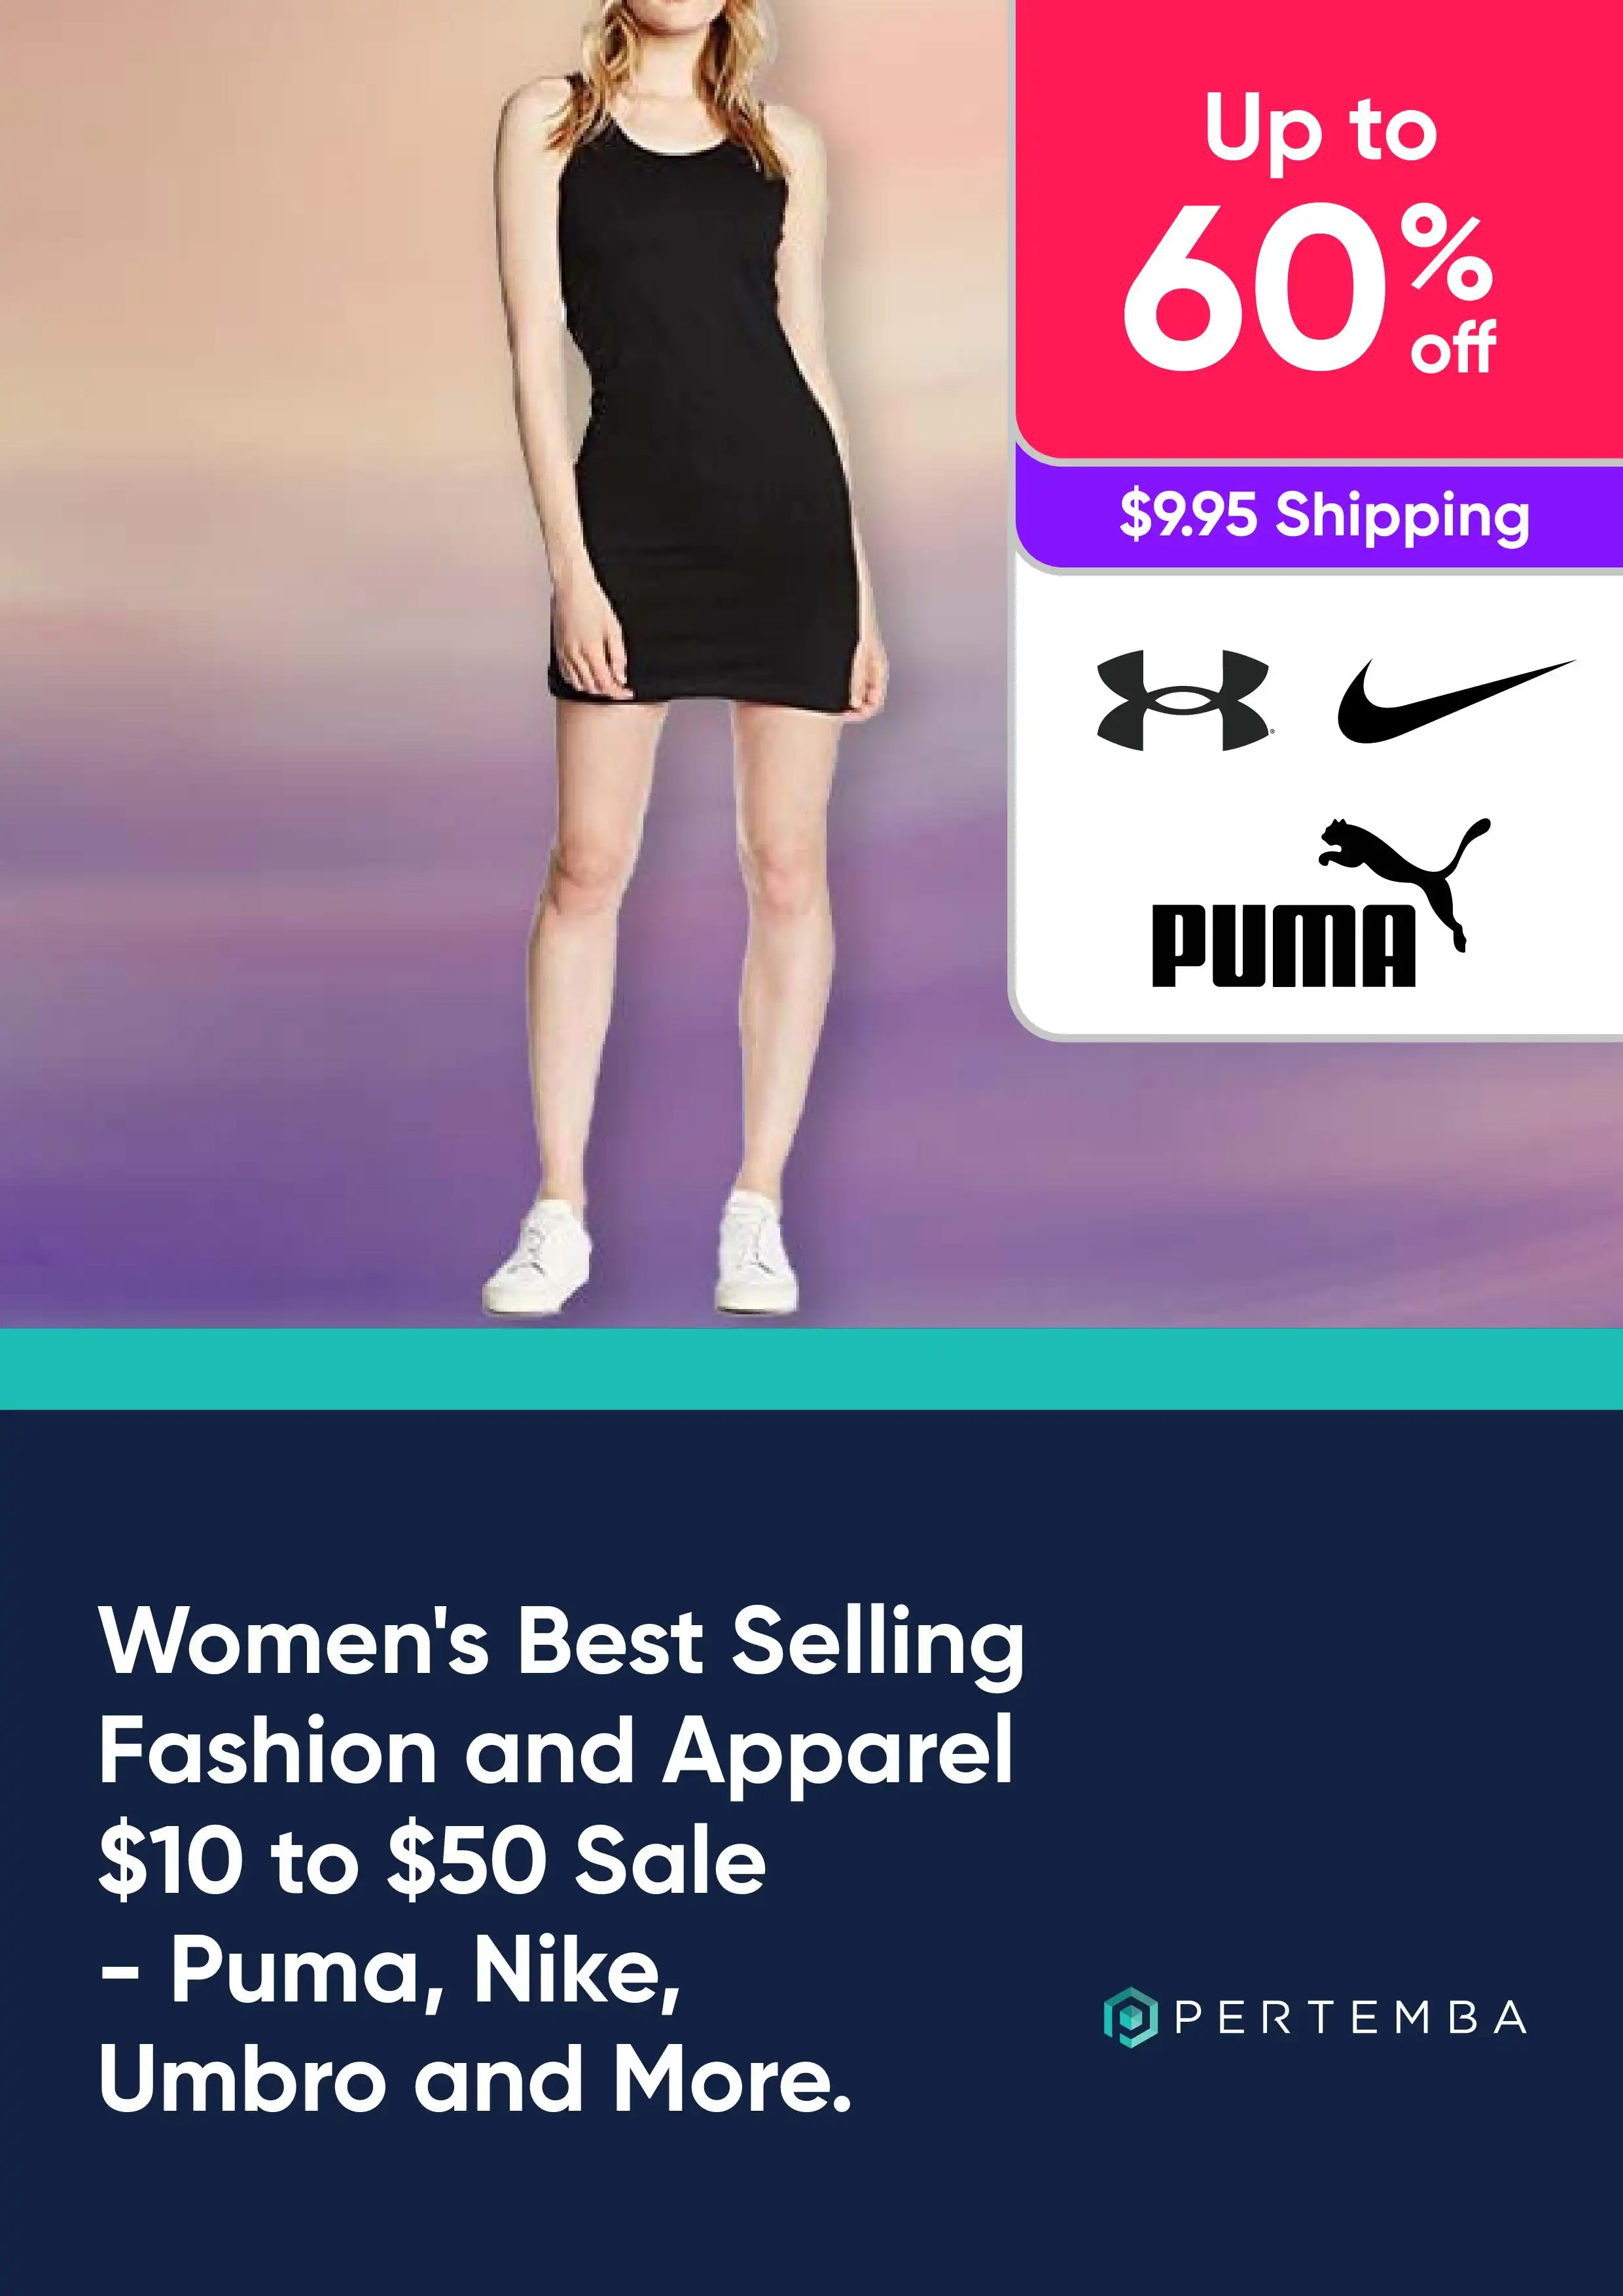 Women’s Best Selling Fashion and Apparel $10 to $50 Sale - Up to 60% Off